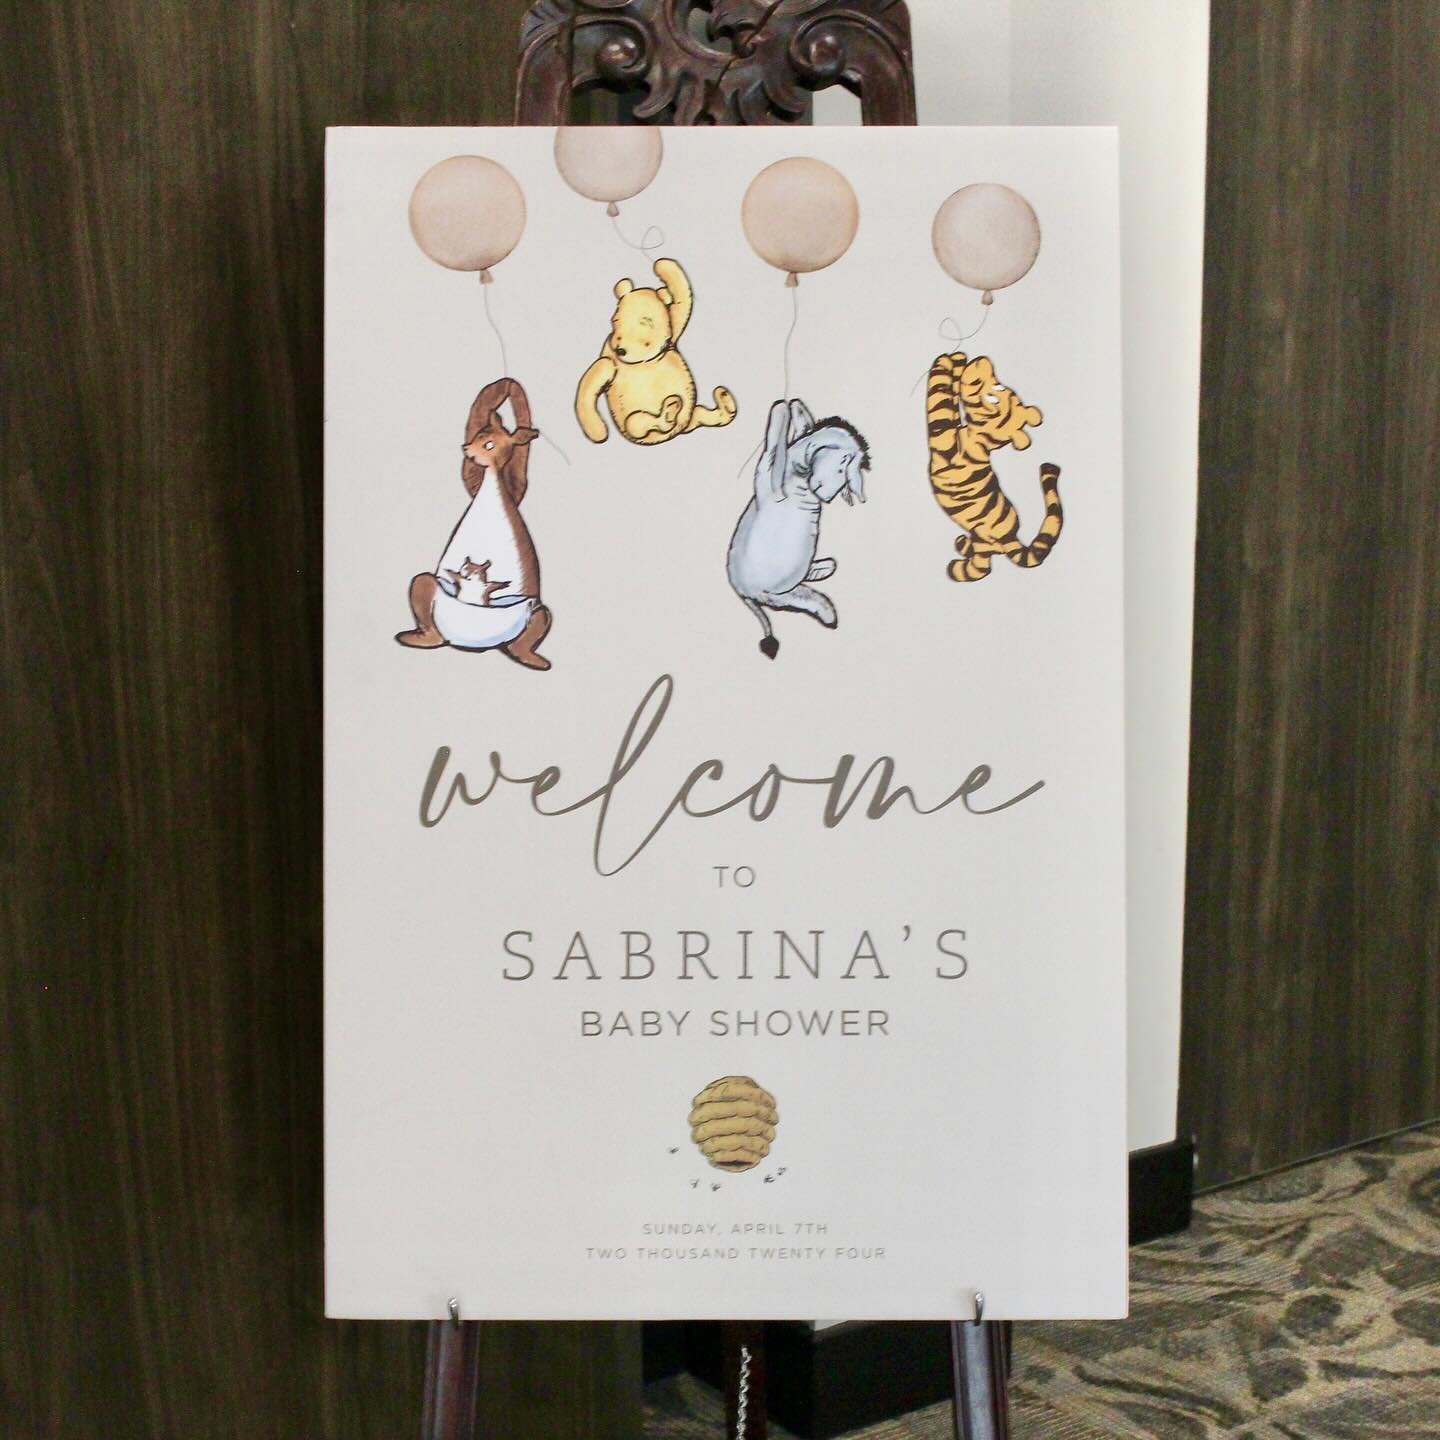 Do you think signs are important at a Baby Shower? 

I may be biased but I love walking into an event full of details and special touches!